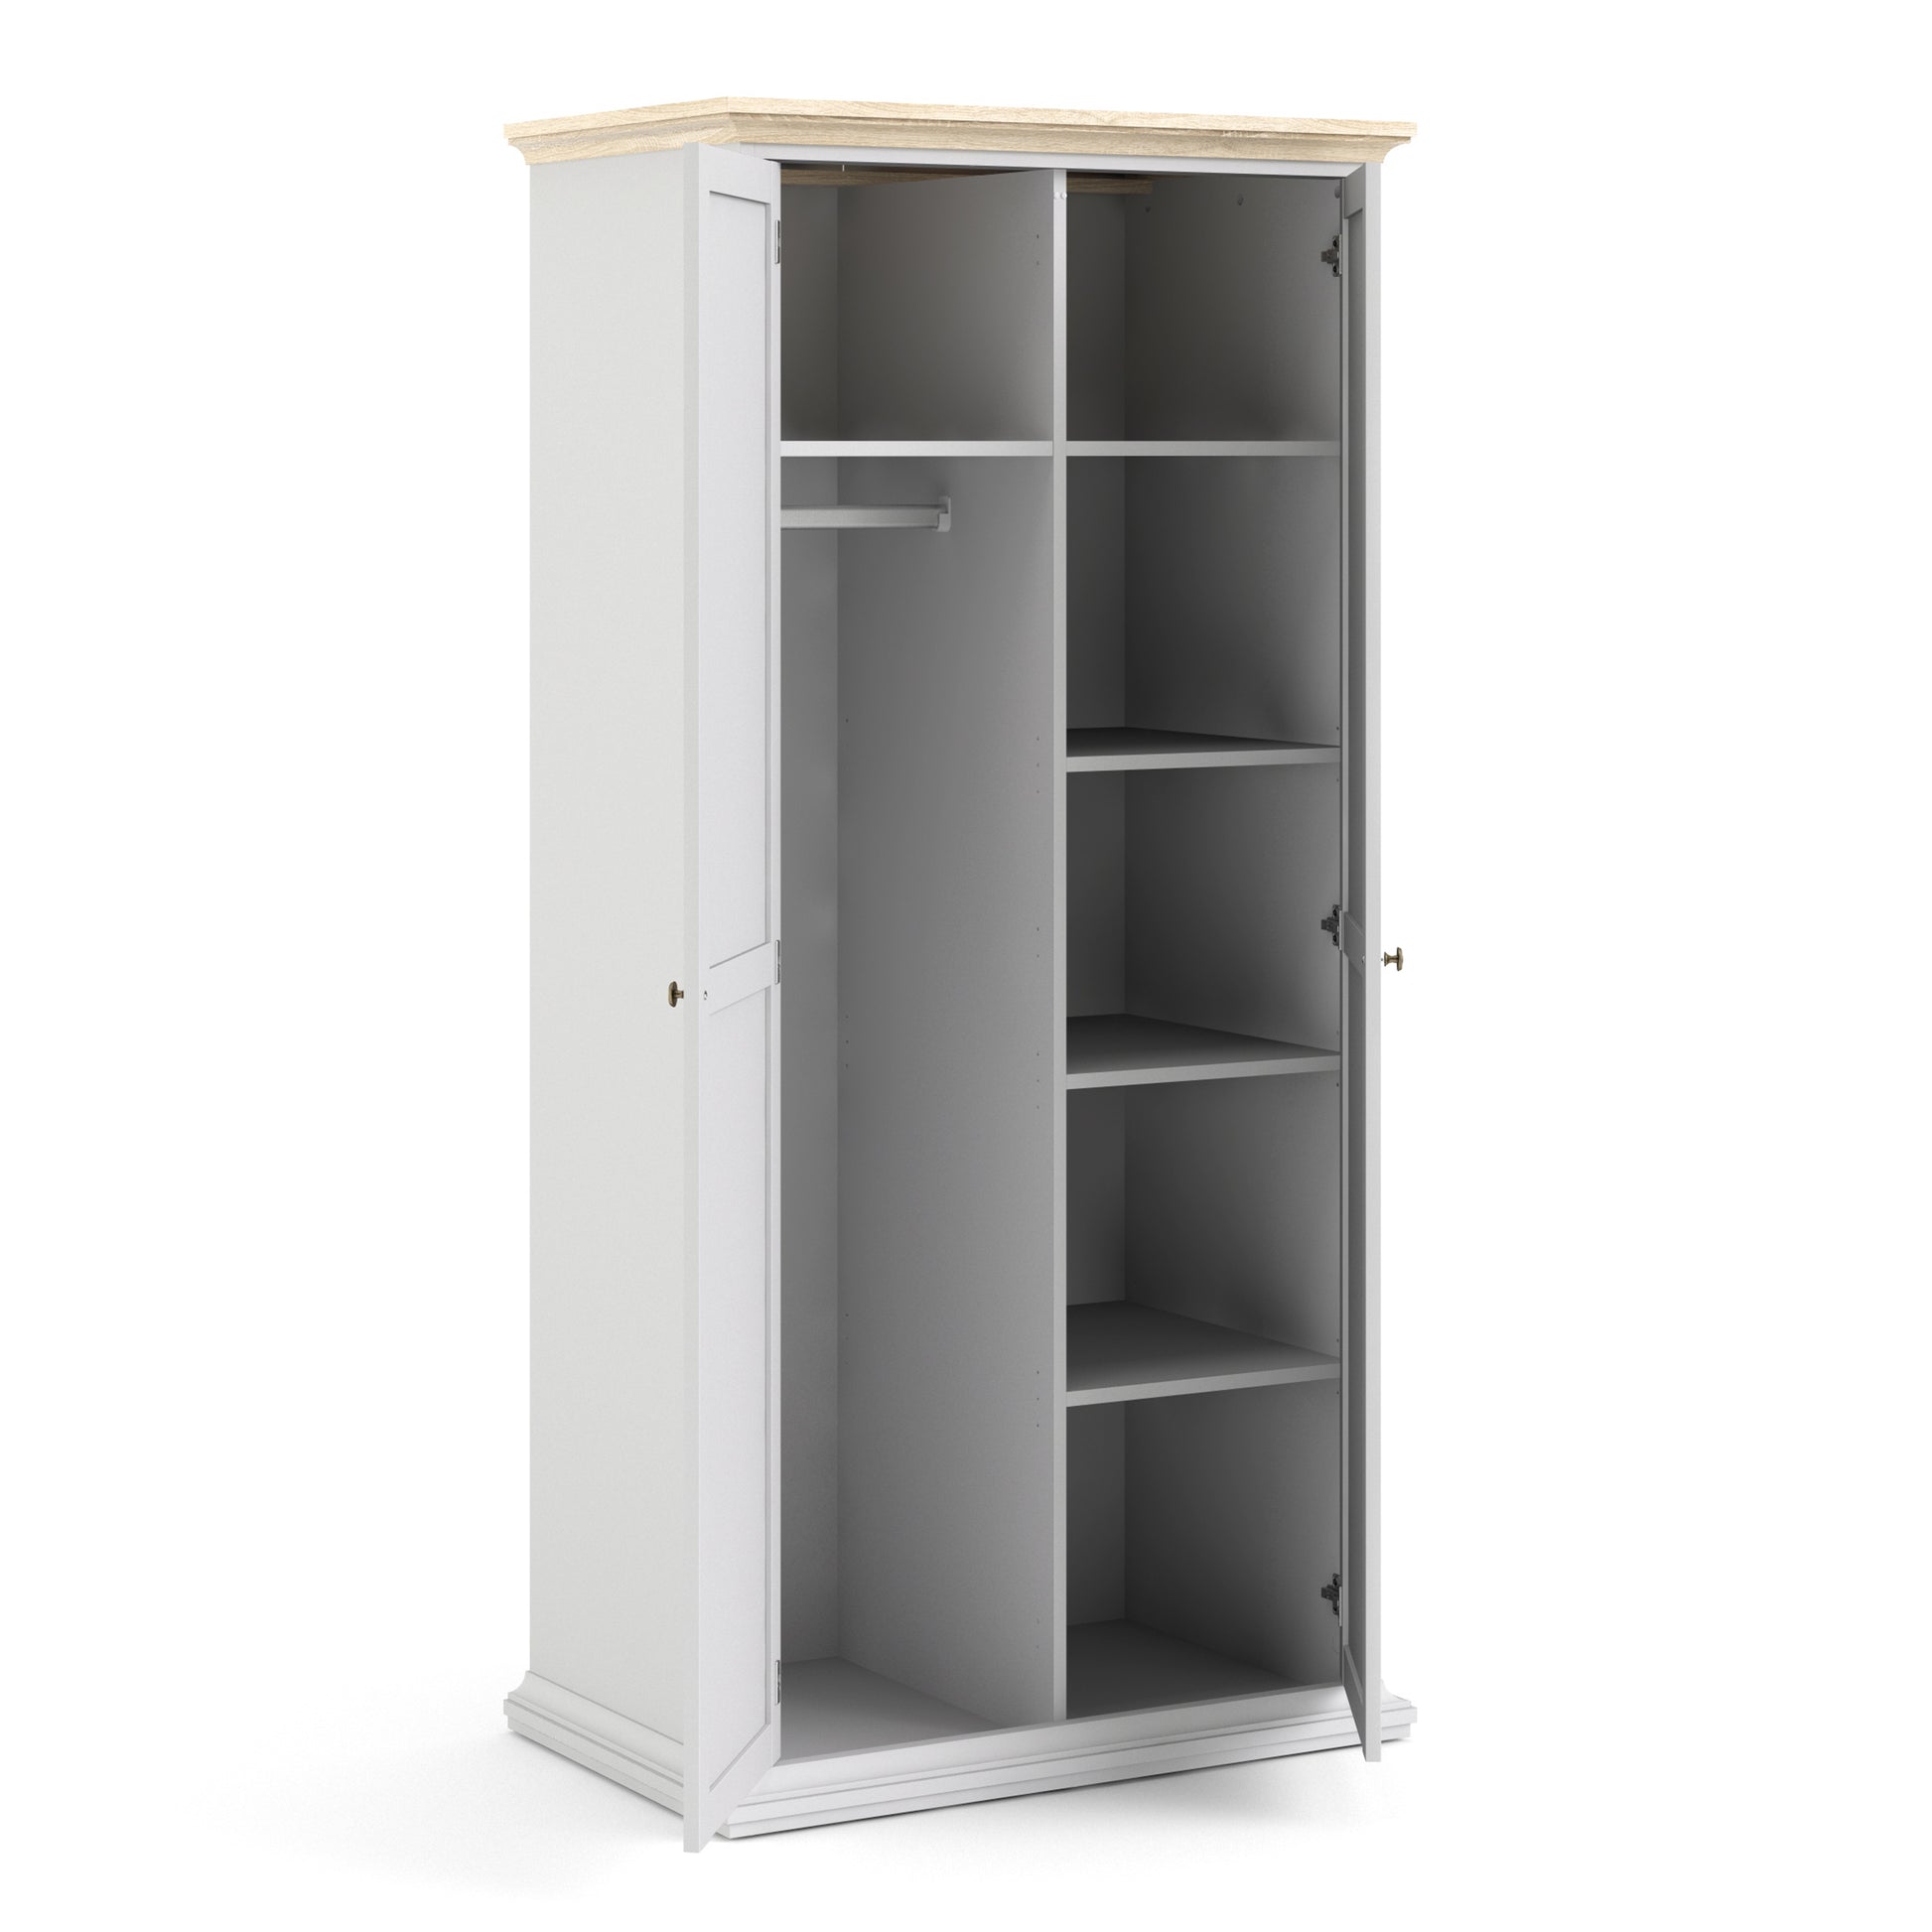 Paris  Wardrobe with 2 Doors in White and Oak